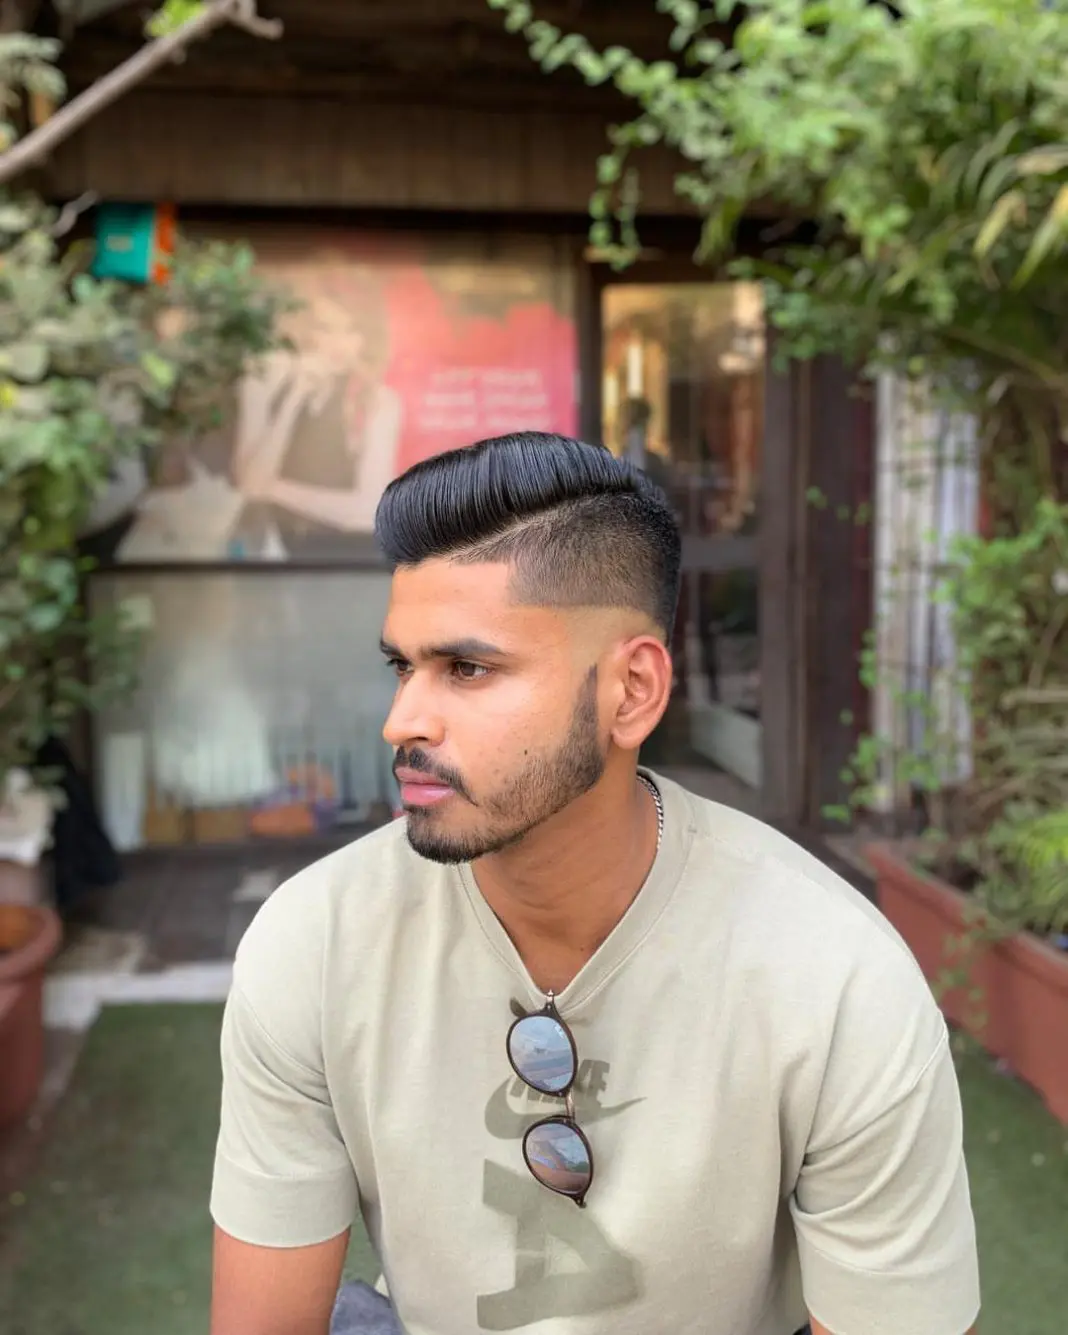 reports says Suryakumar Yadav is likely to edge over Shreyas Iyer in the  First Test match against New Zealand - Latest Cricket News - IND vs NZ:  सूर्यकुमार यादव या श्रेयस अय्यर,